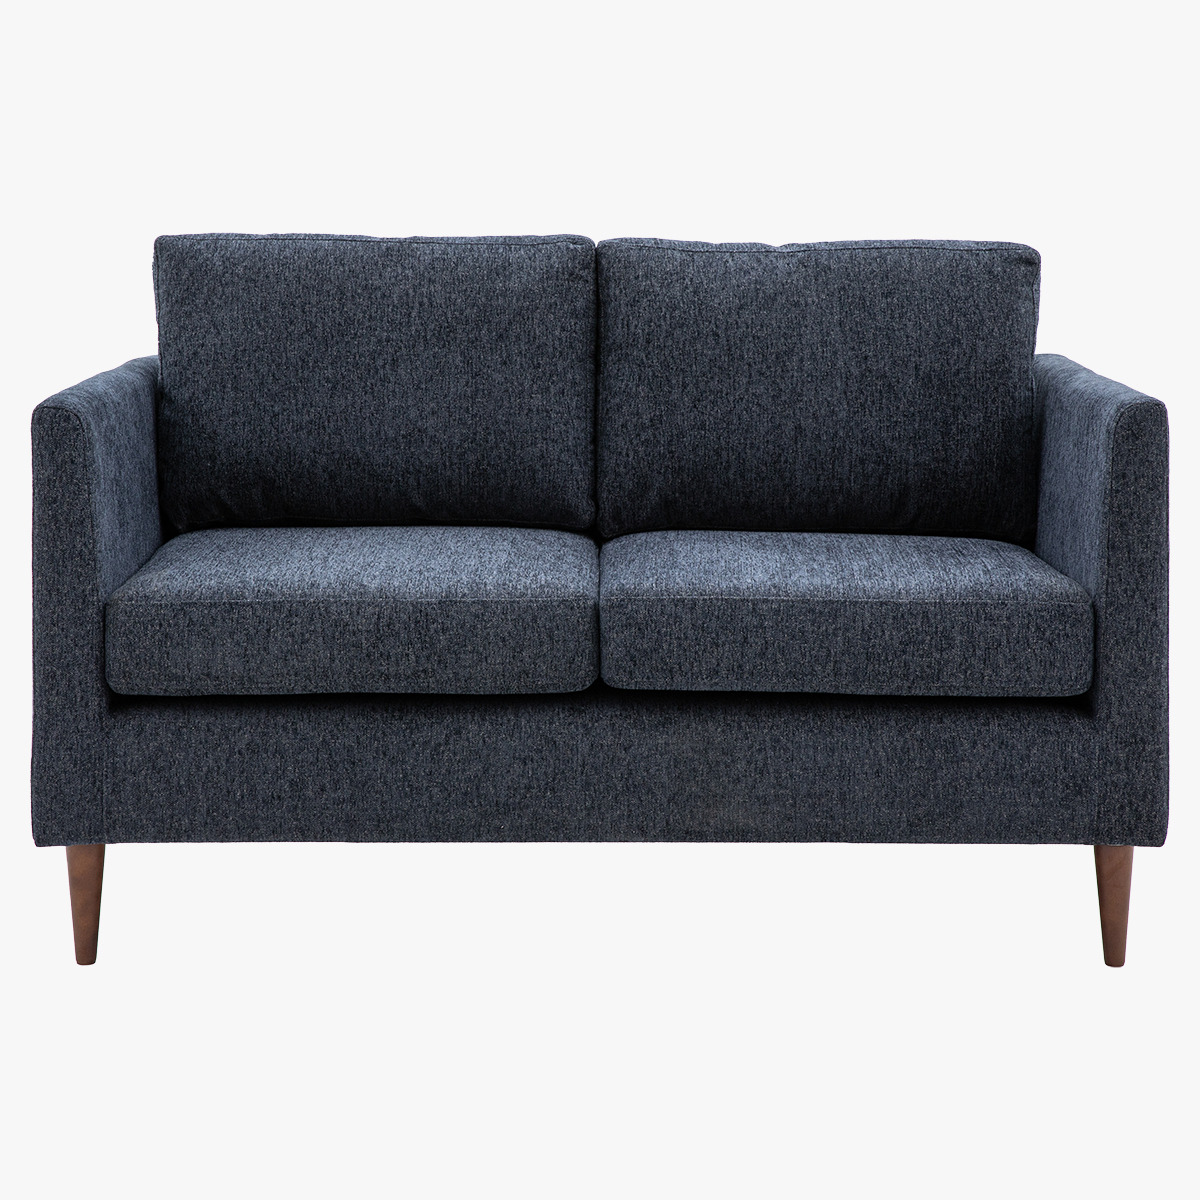 Sloucher 2 Seater Sofa in Charcoal